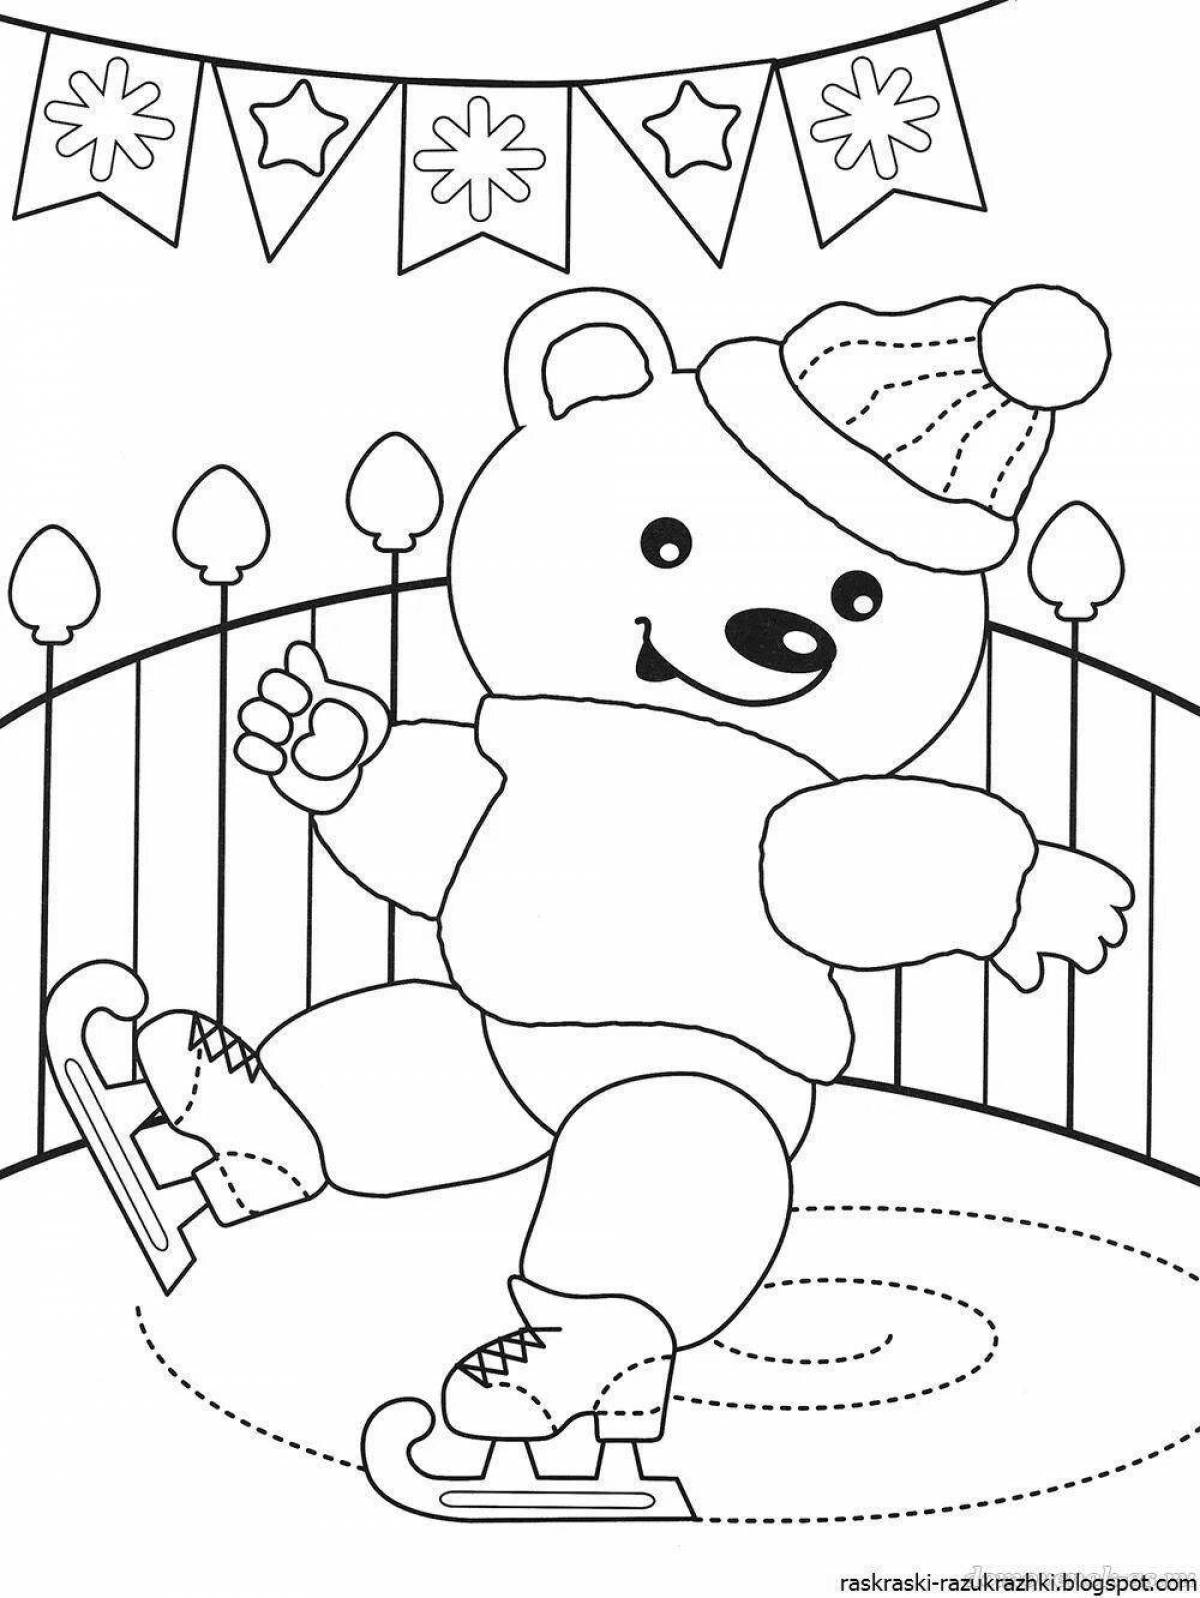 Fantastic coloring book for children winter 2 3 years old